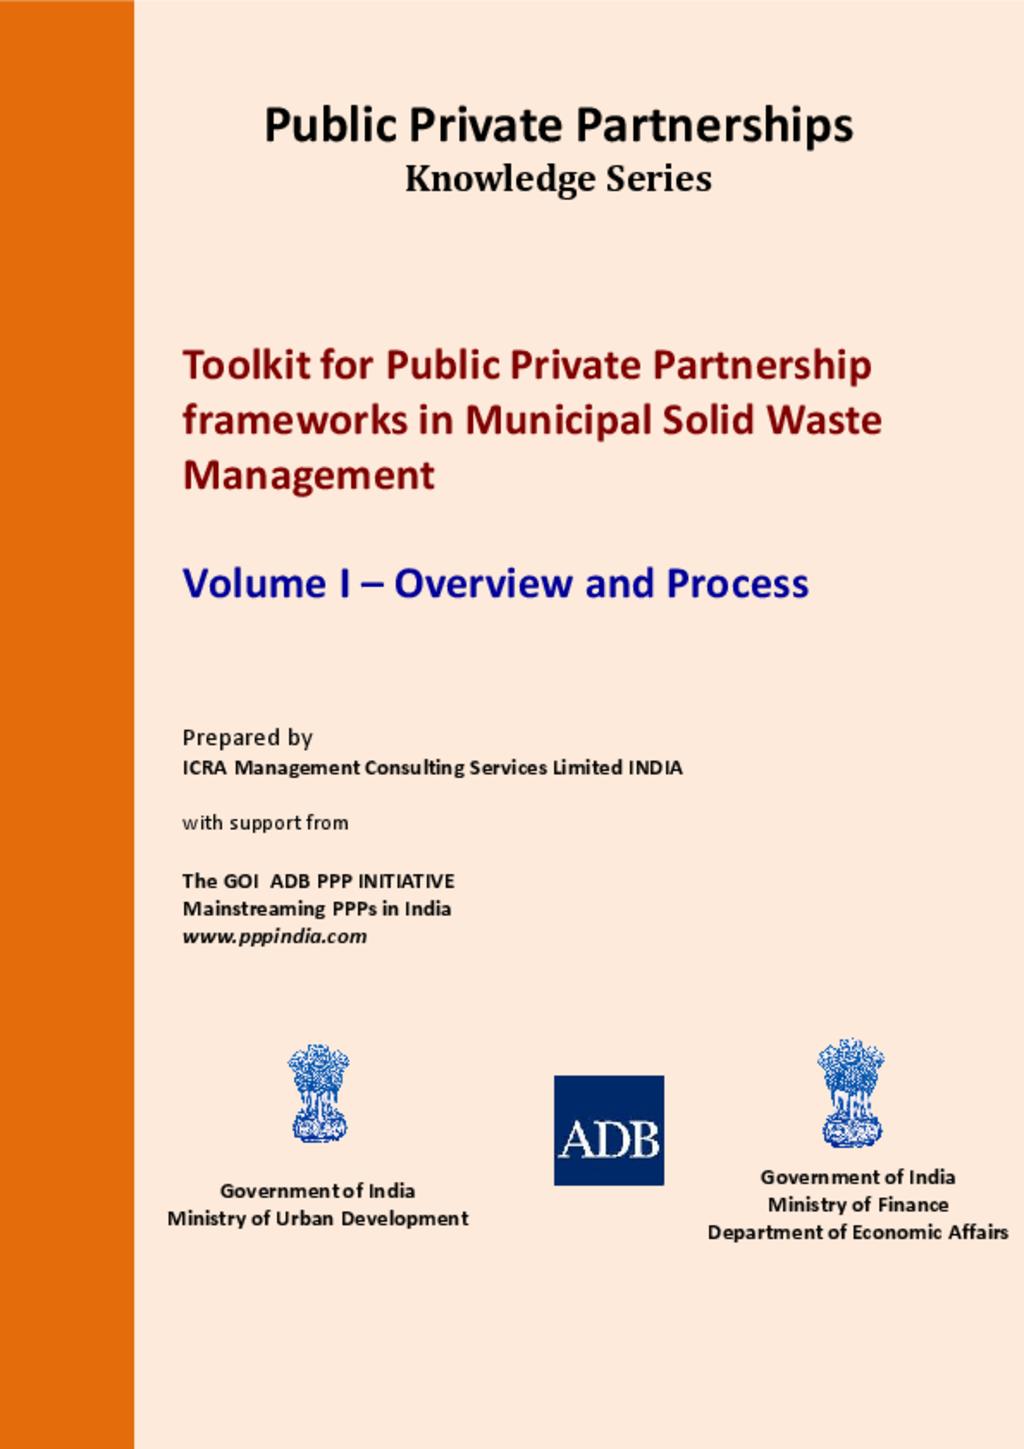 Solid Waste Management Toolkit